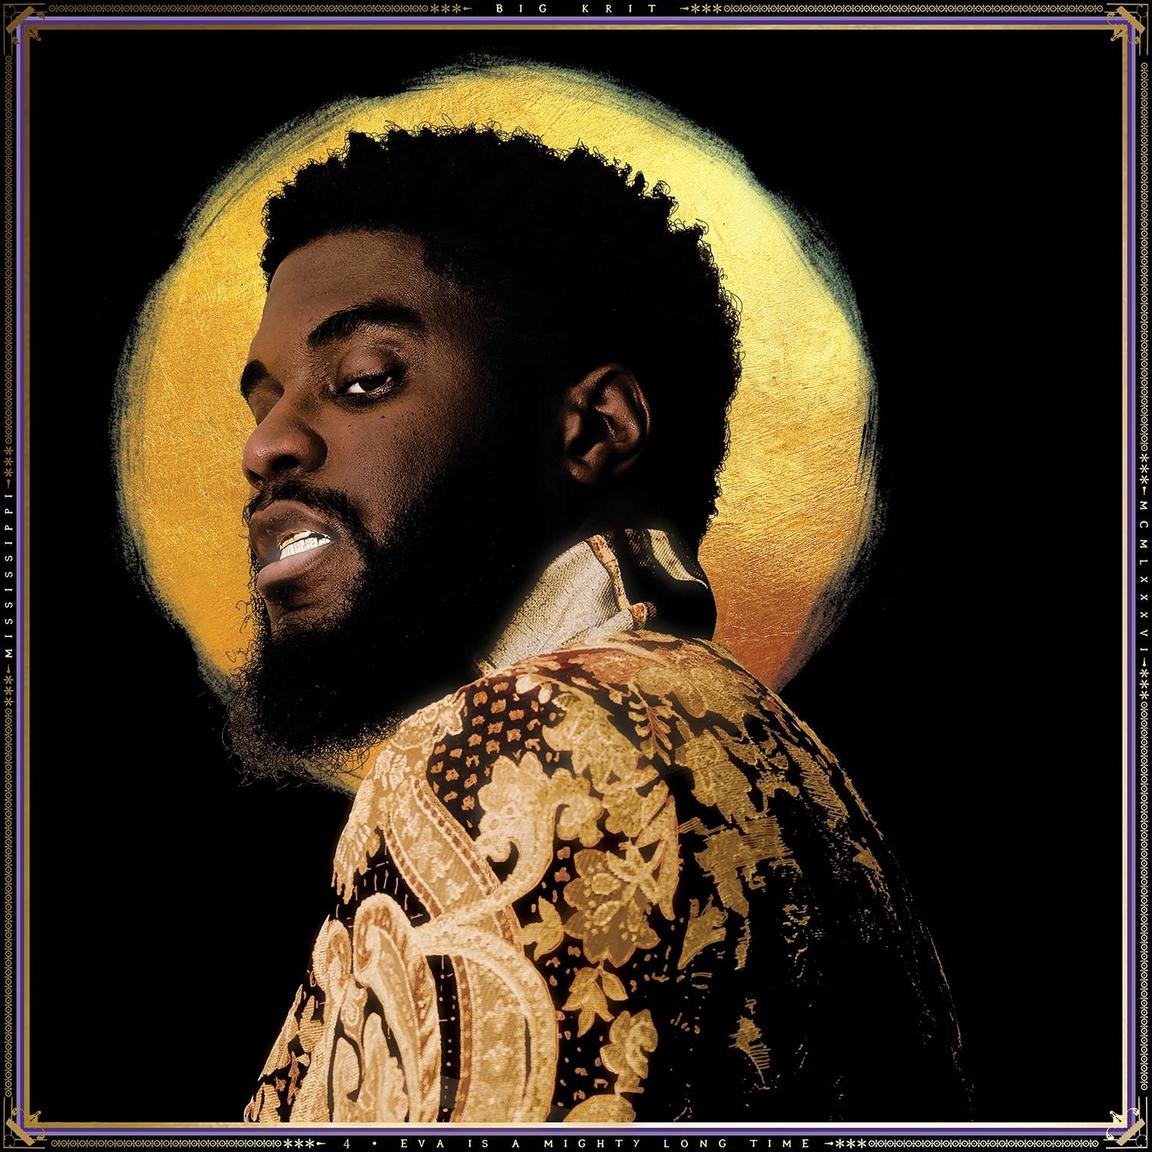 Big K.R.I.T. / 4eva Is A Mighty Long Time